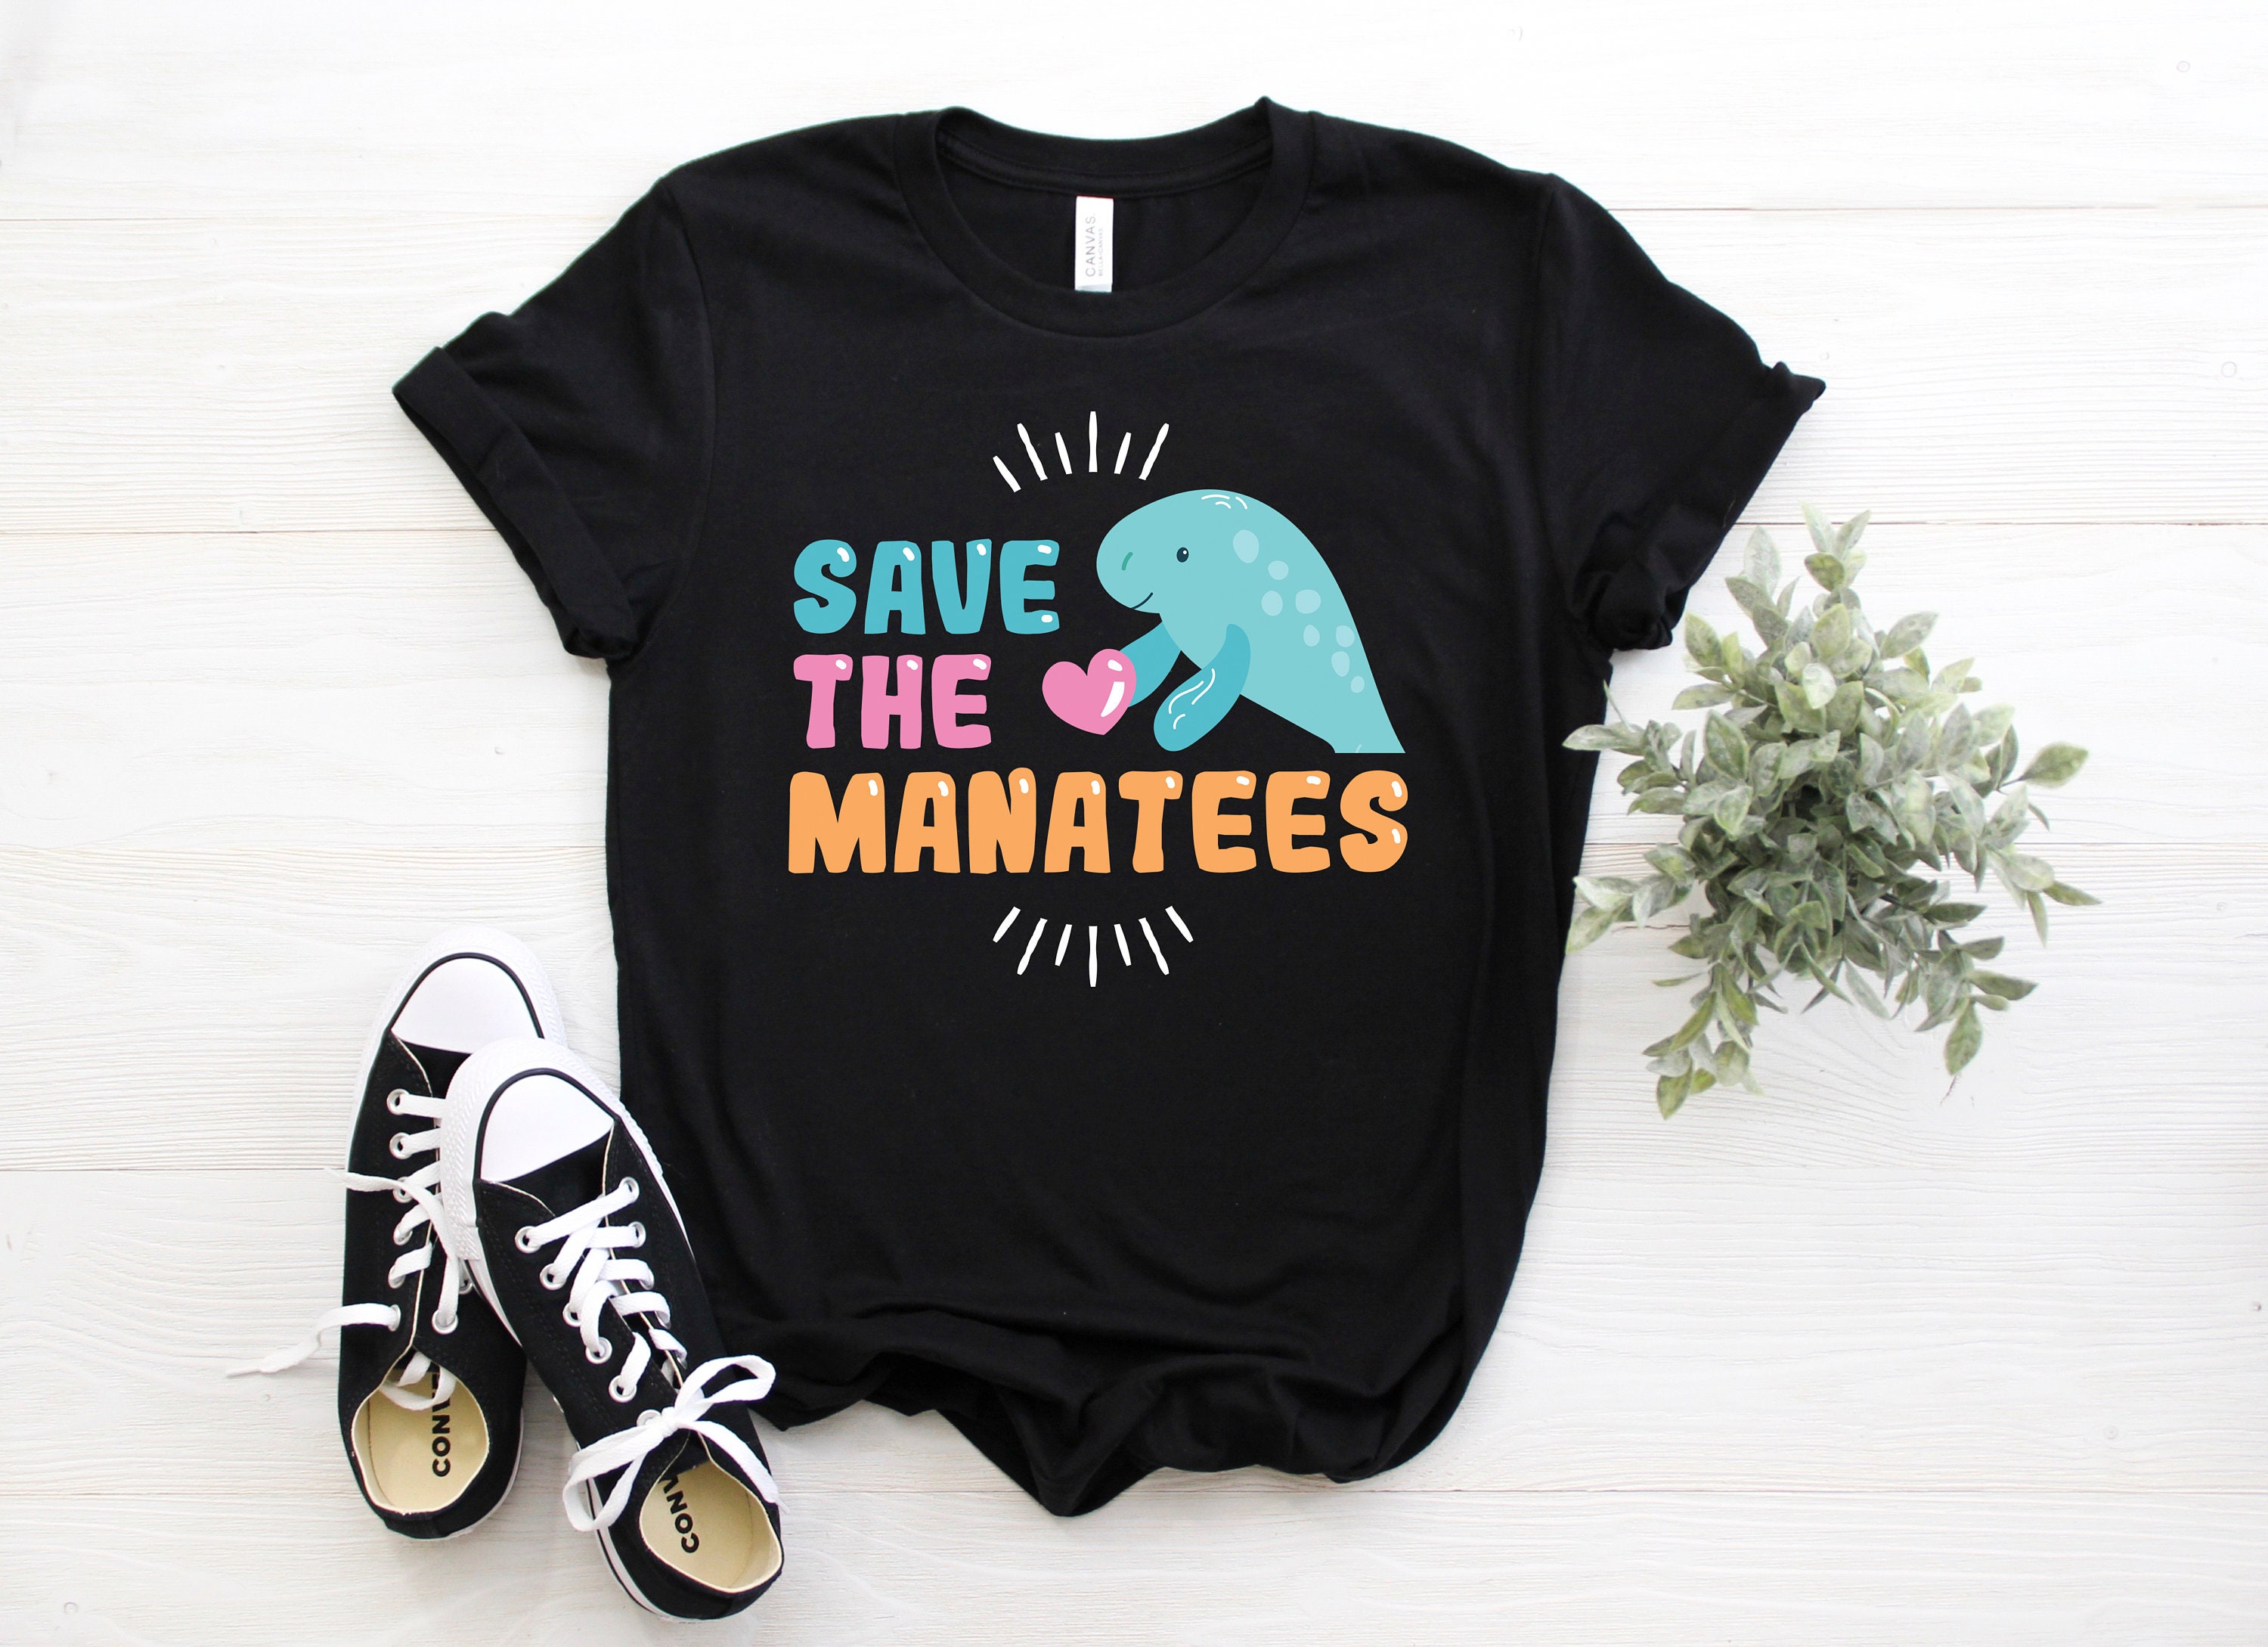 Funny Shirt Save The Chubby Mermaids Tee Manatees Hoodie for Women and Men